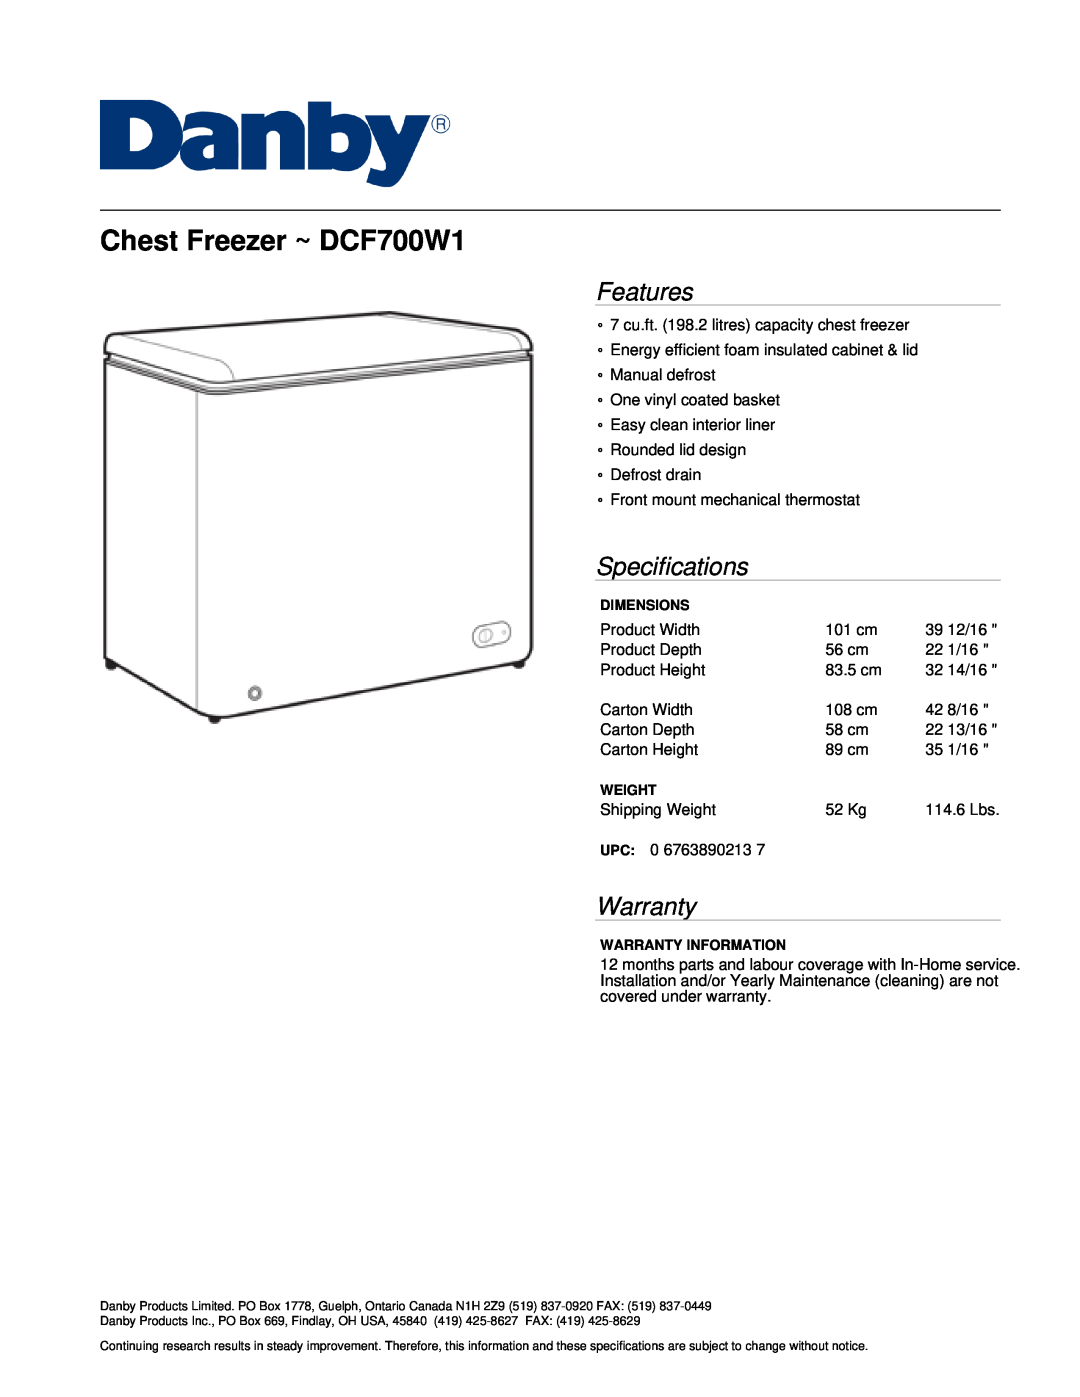 Danby specifications Chest Freezer ~ DCF700W1, Features, Specifications, Warranty 